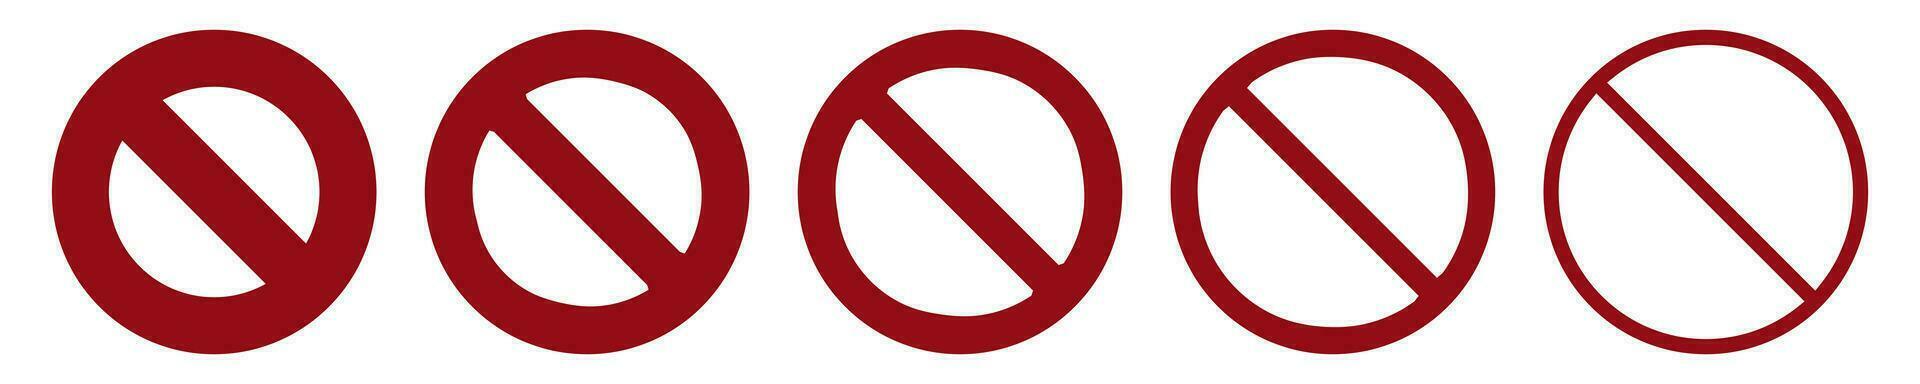 Prohibit red crossed circle sign. Ban forbidden symbol. vector